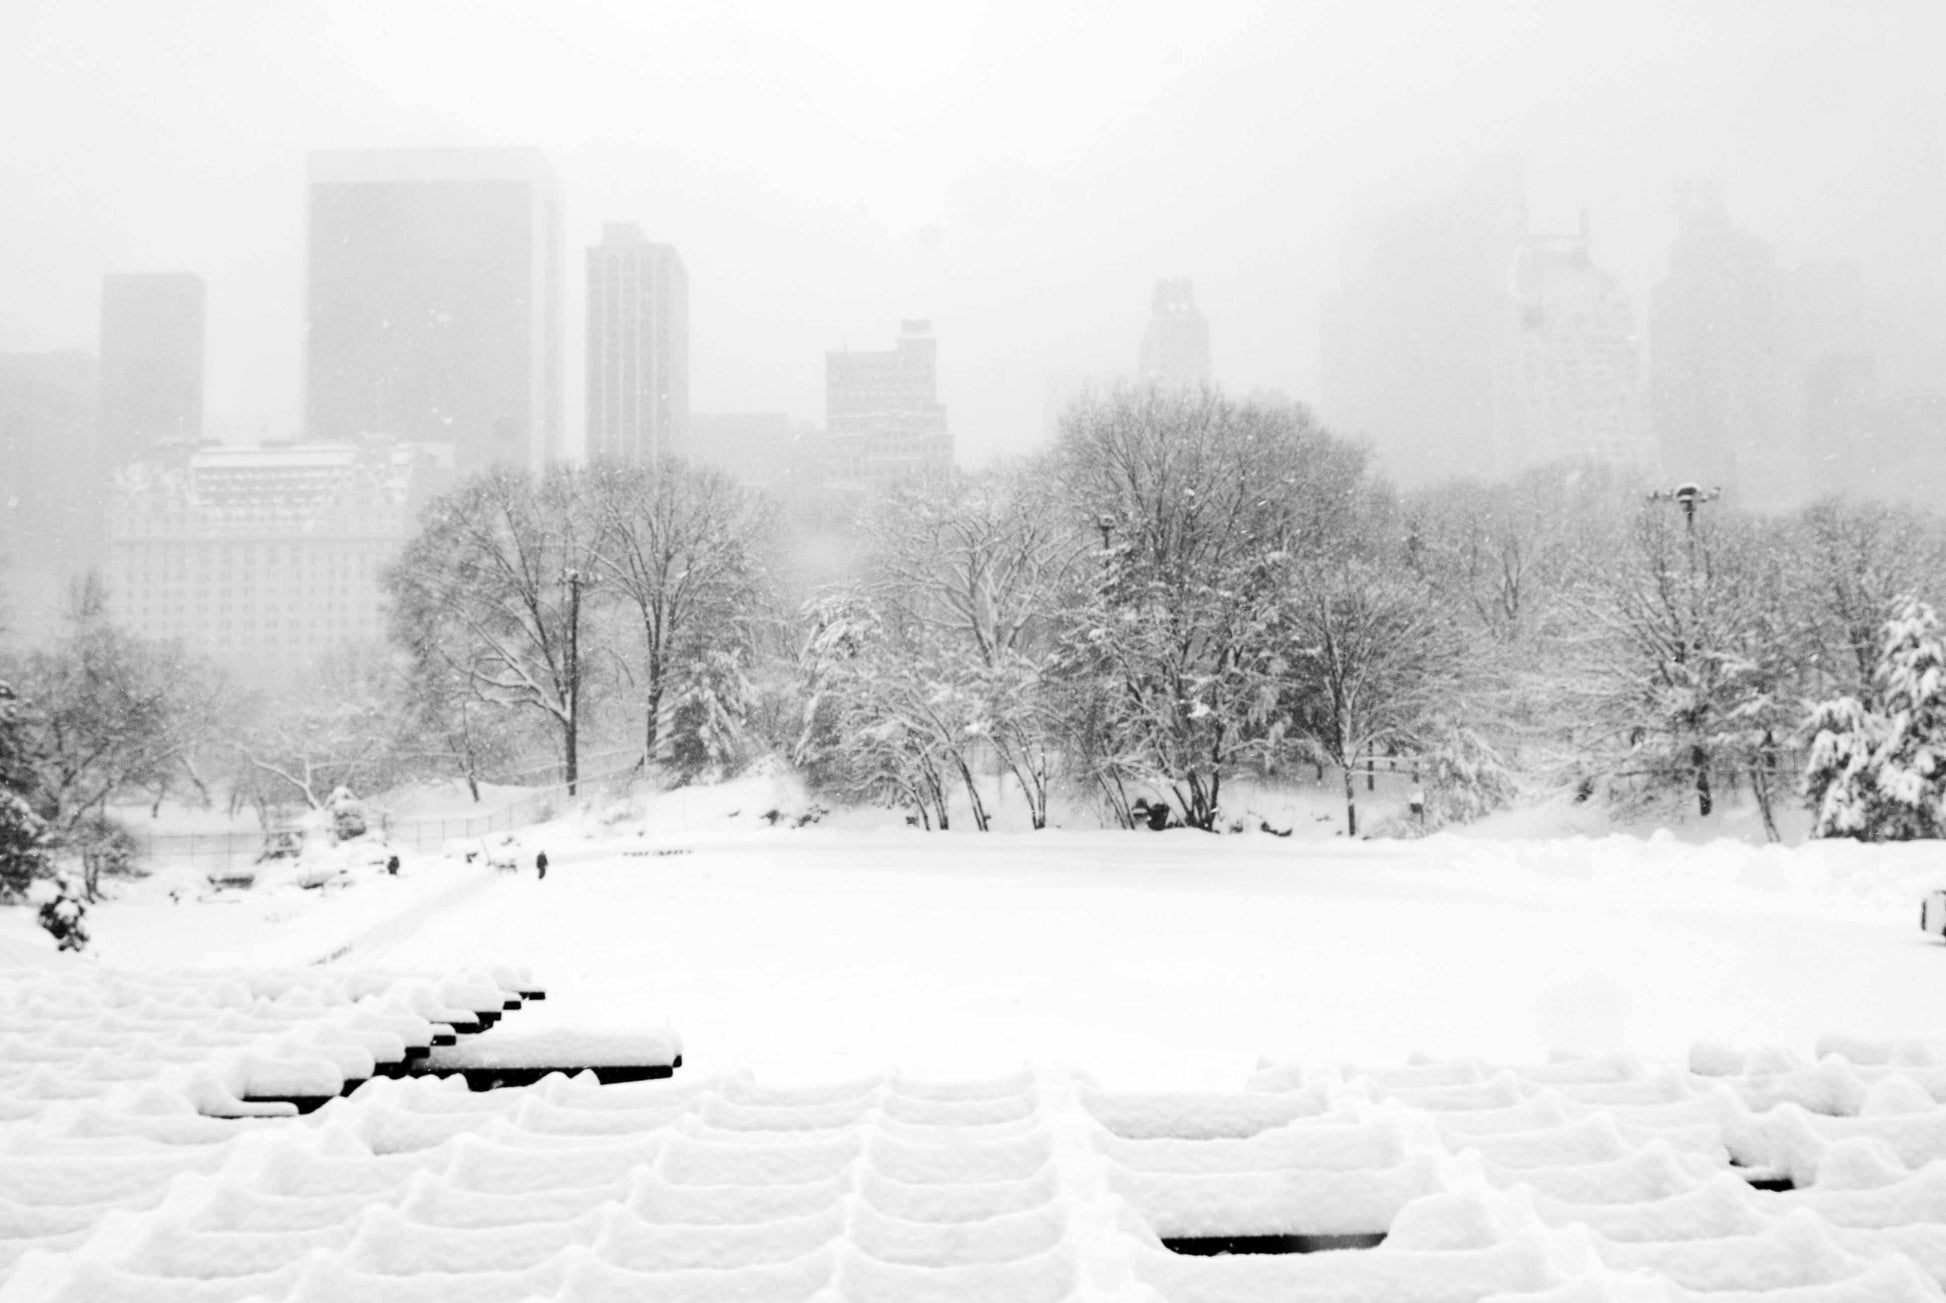 Alessandra Mattanza | INFINITY, Central Park, New York. Winters gloom envelopes a snowy Central Park. Available as an art print or photographic print on acrylic glass.